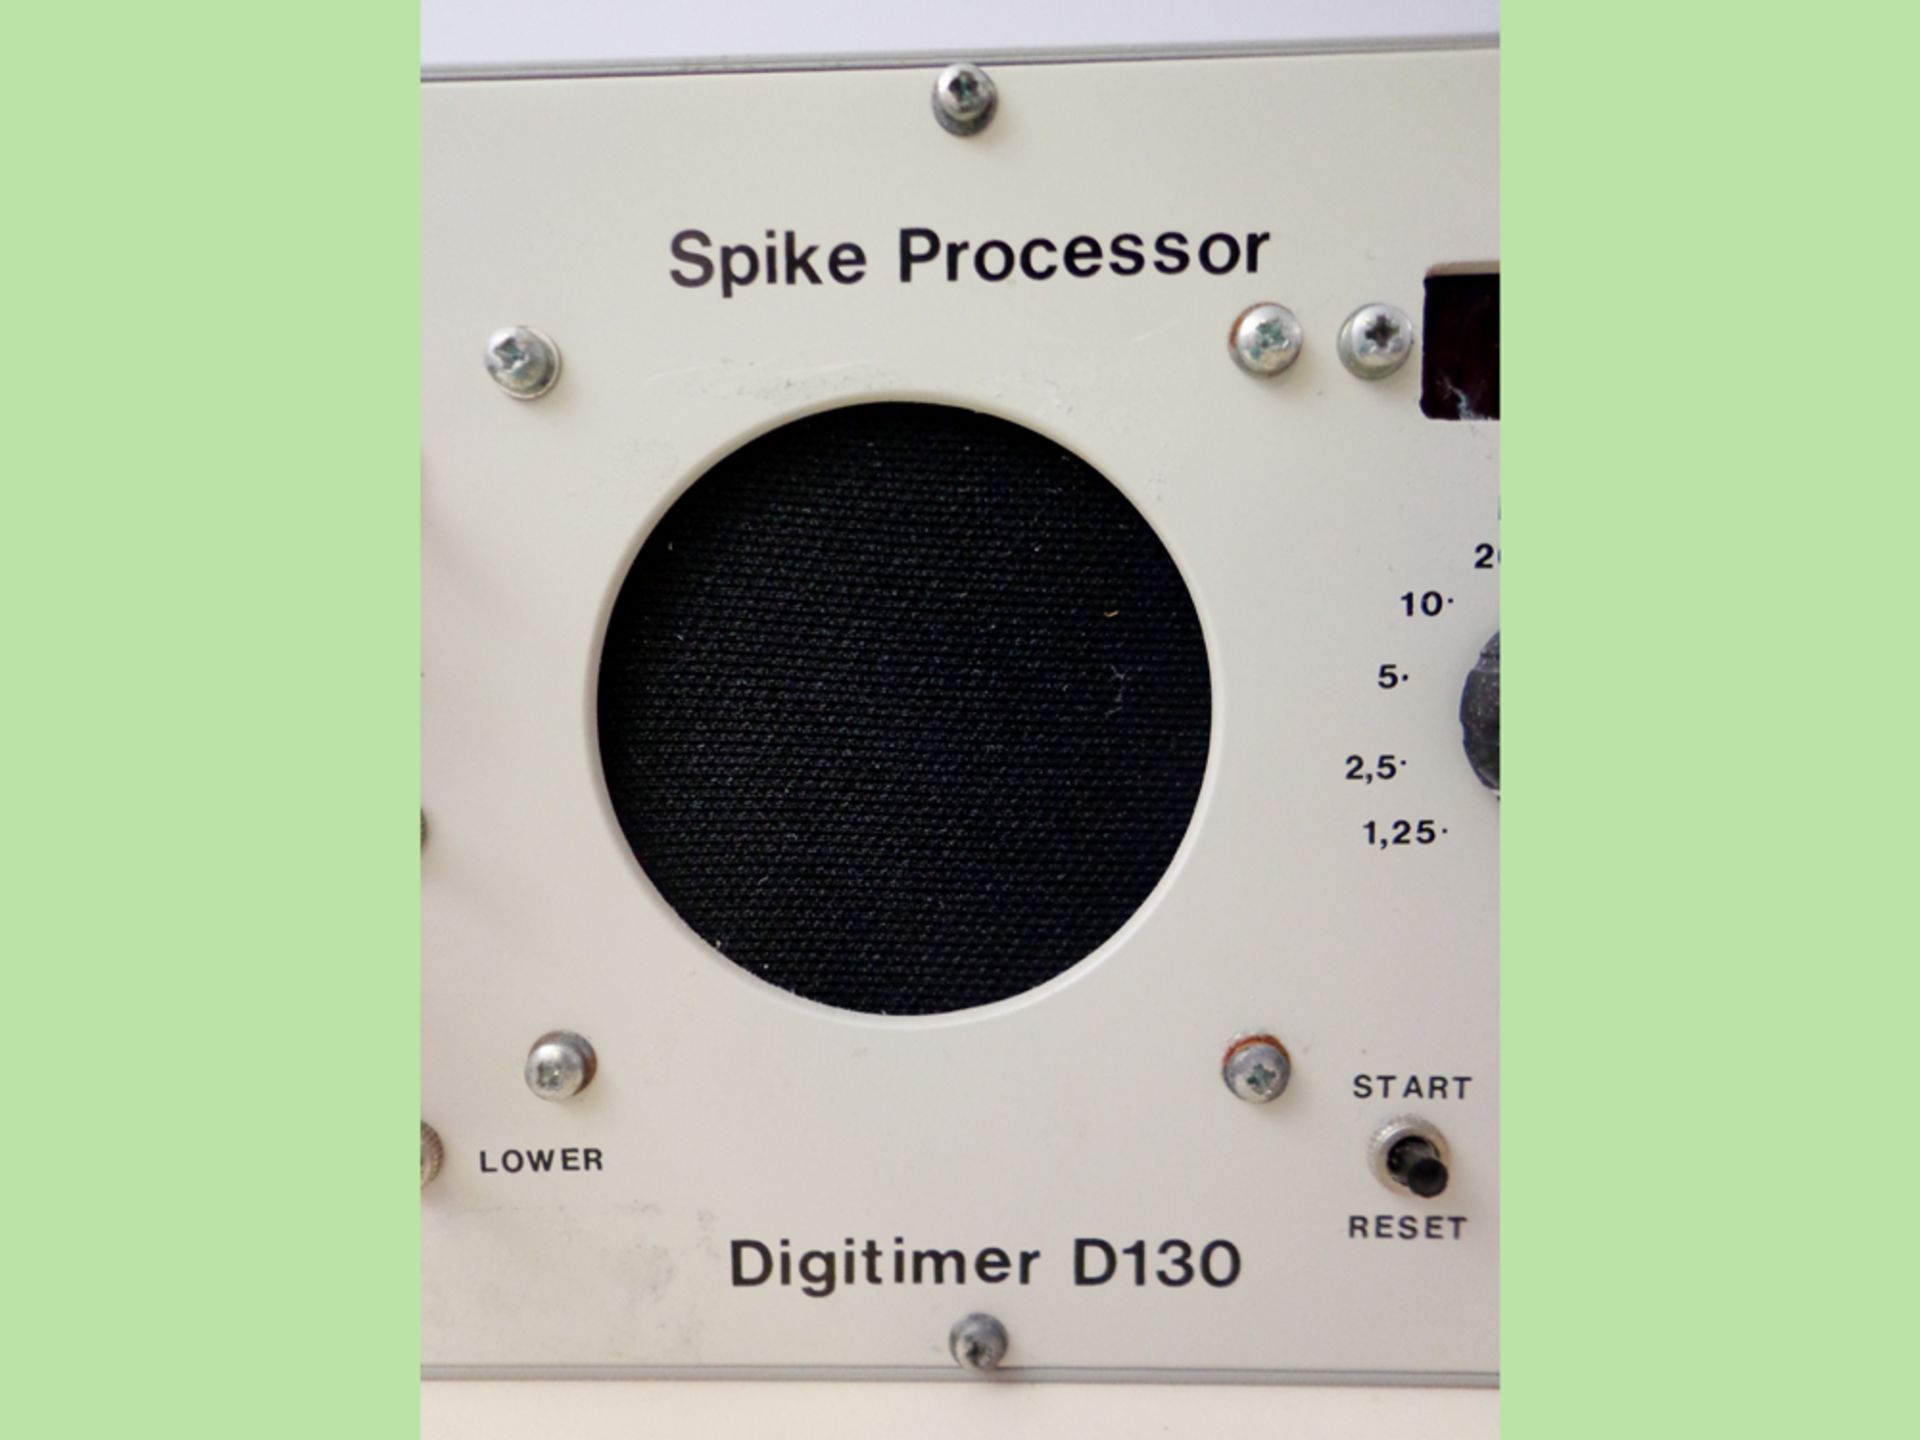 Digitimer D130 Spike Processor Monitor/Counter, S/N D130-301 - Image 4 of 8